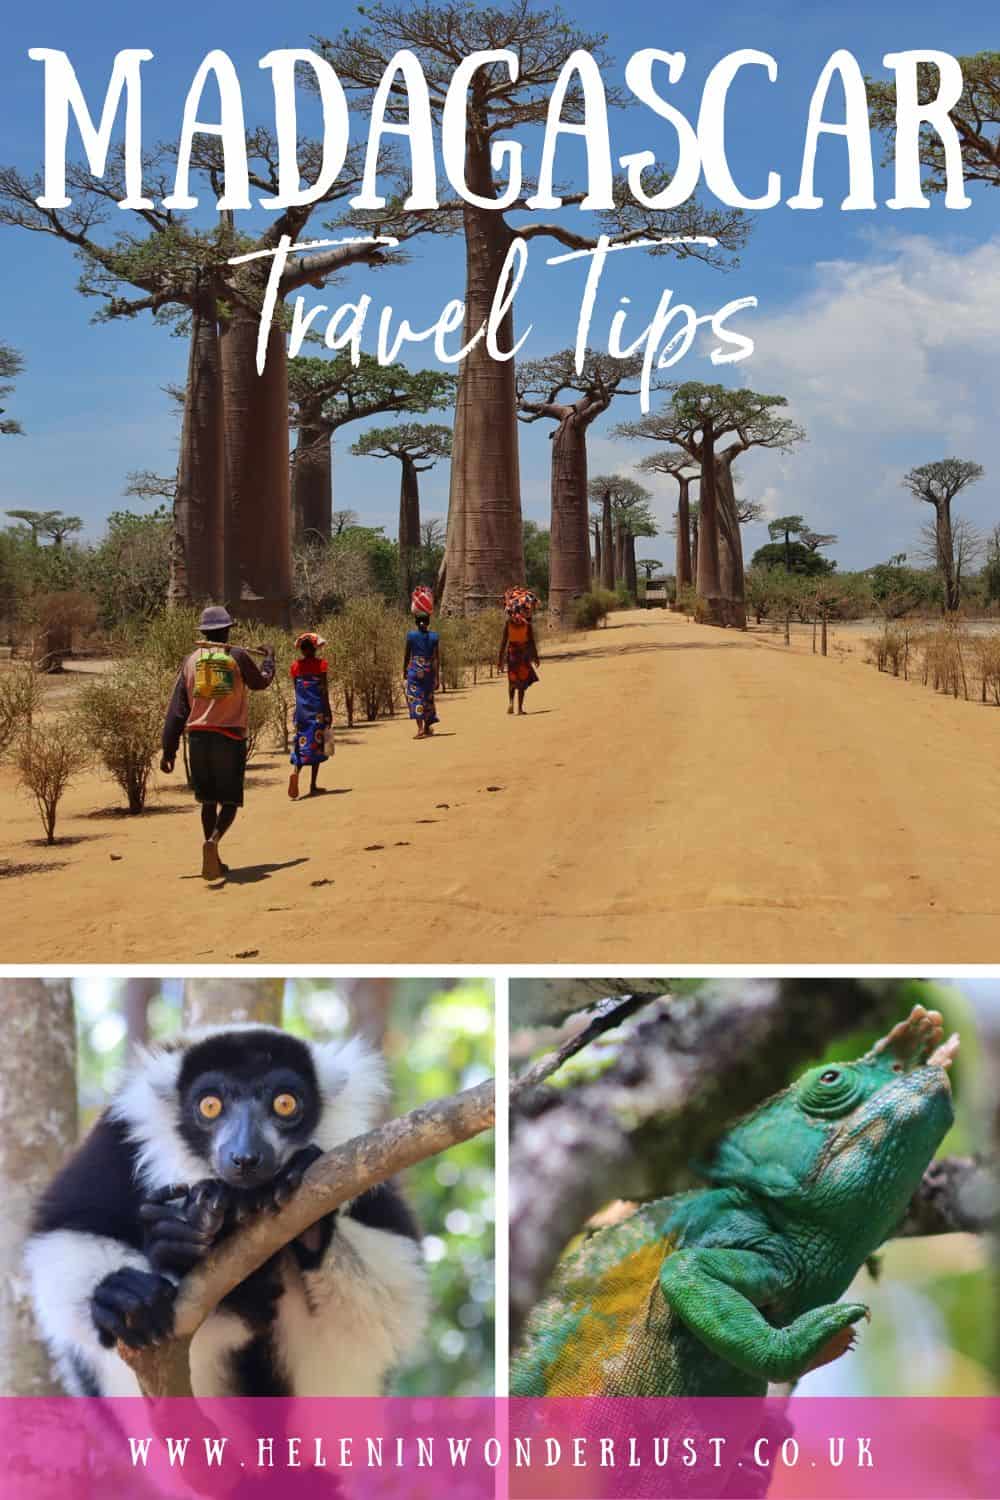 Western Madagascar Travel Guide, What to do in Western Madagascar